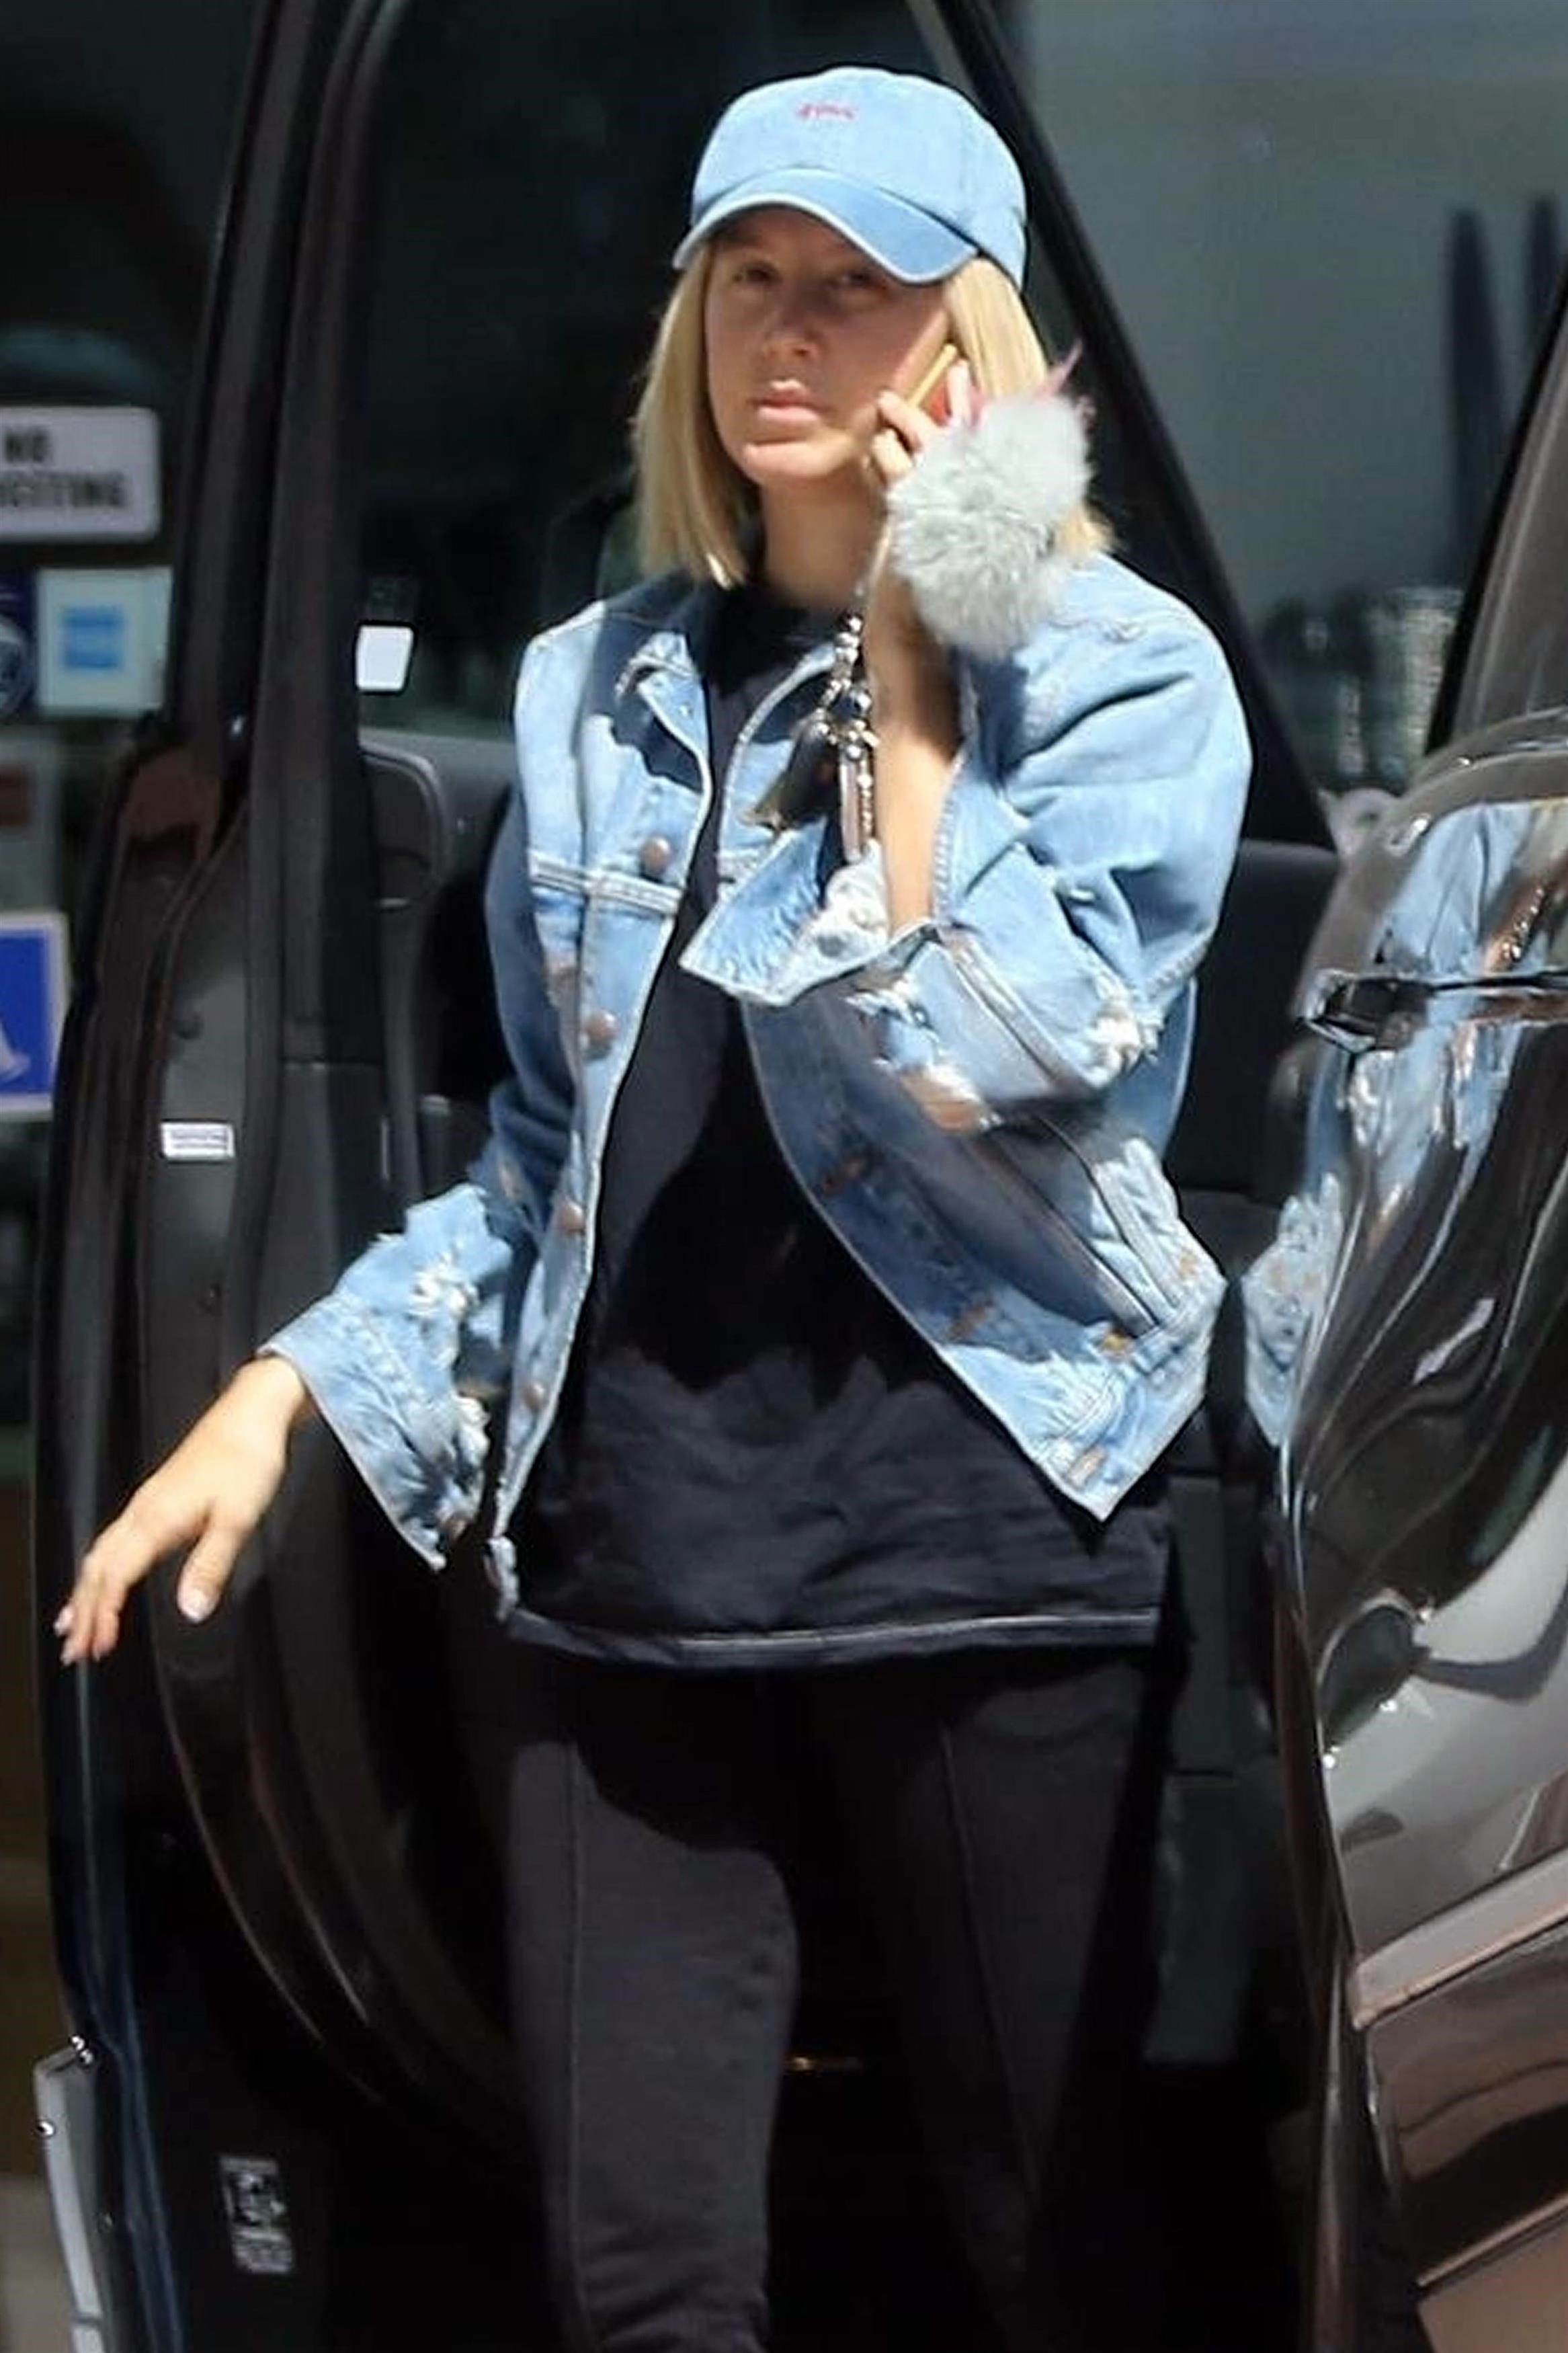 ashley-tisdale-going-to-a-nail-salon-in-studio-city-92218.jpg